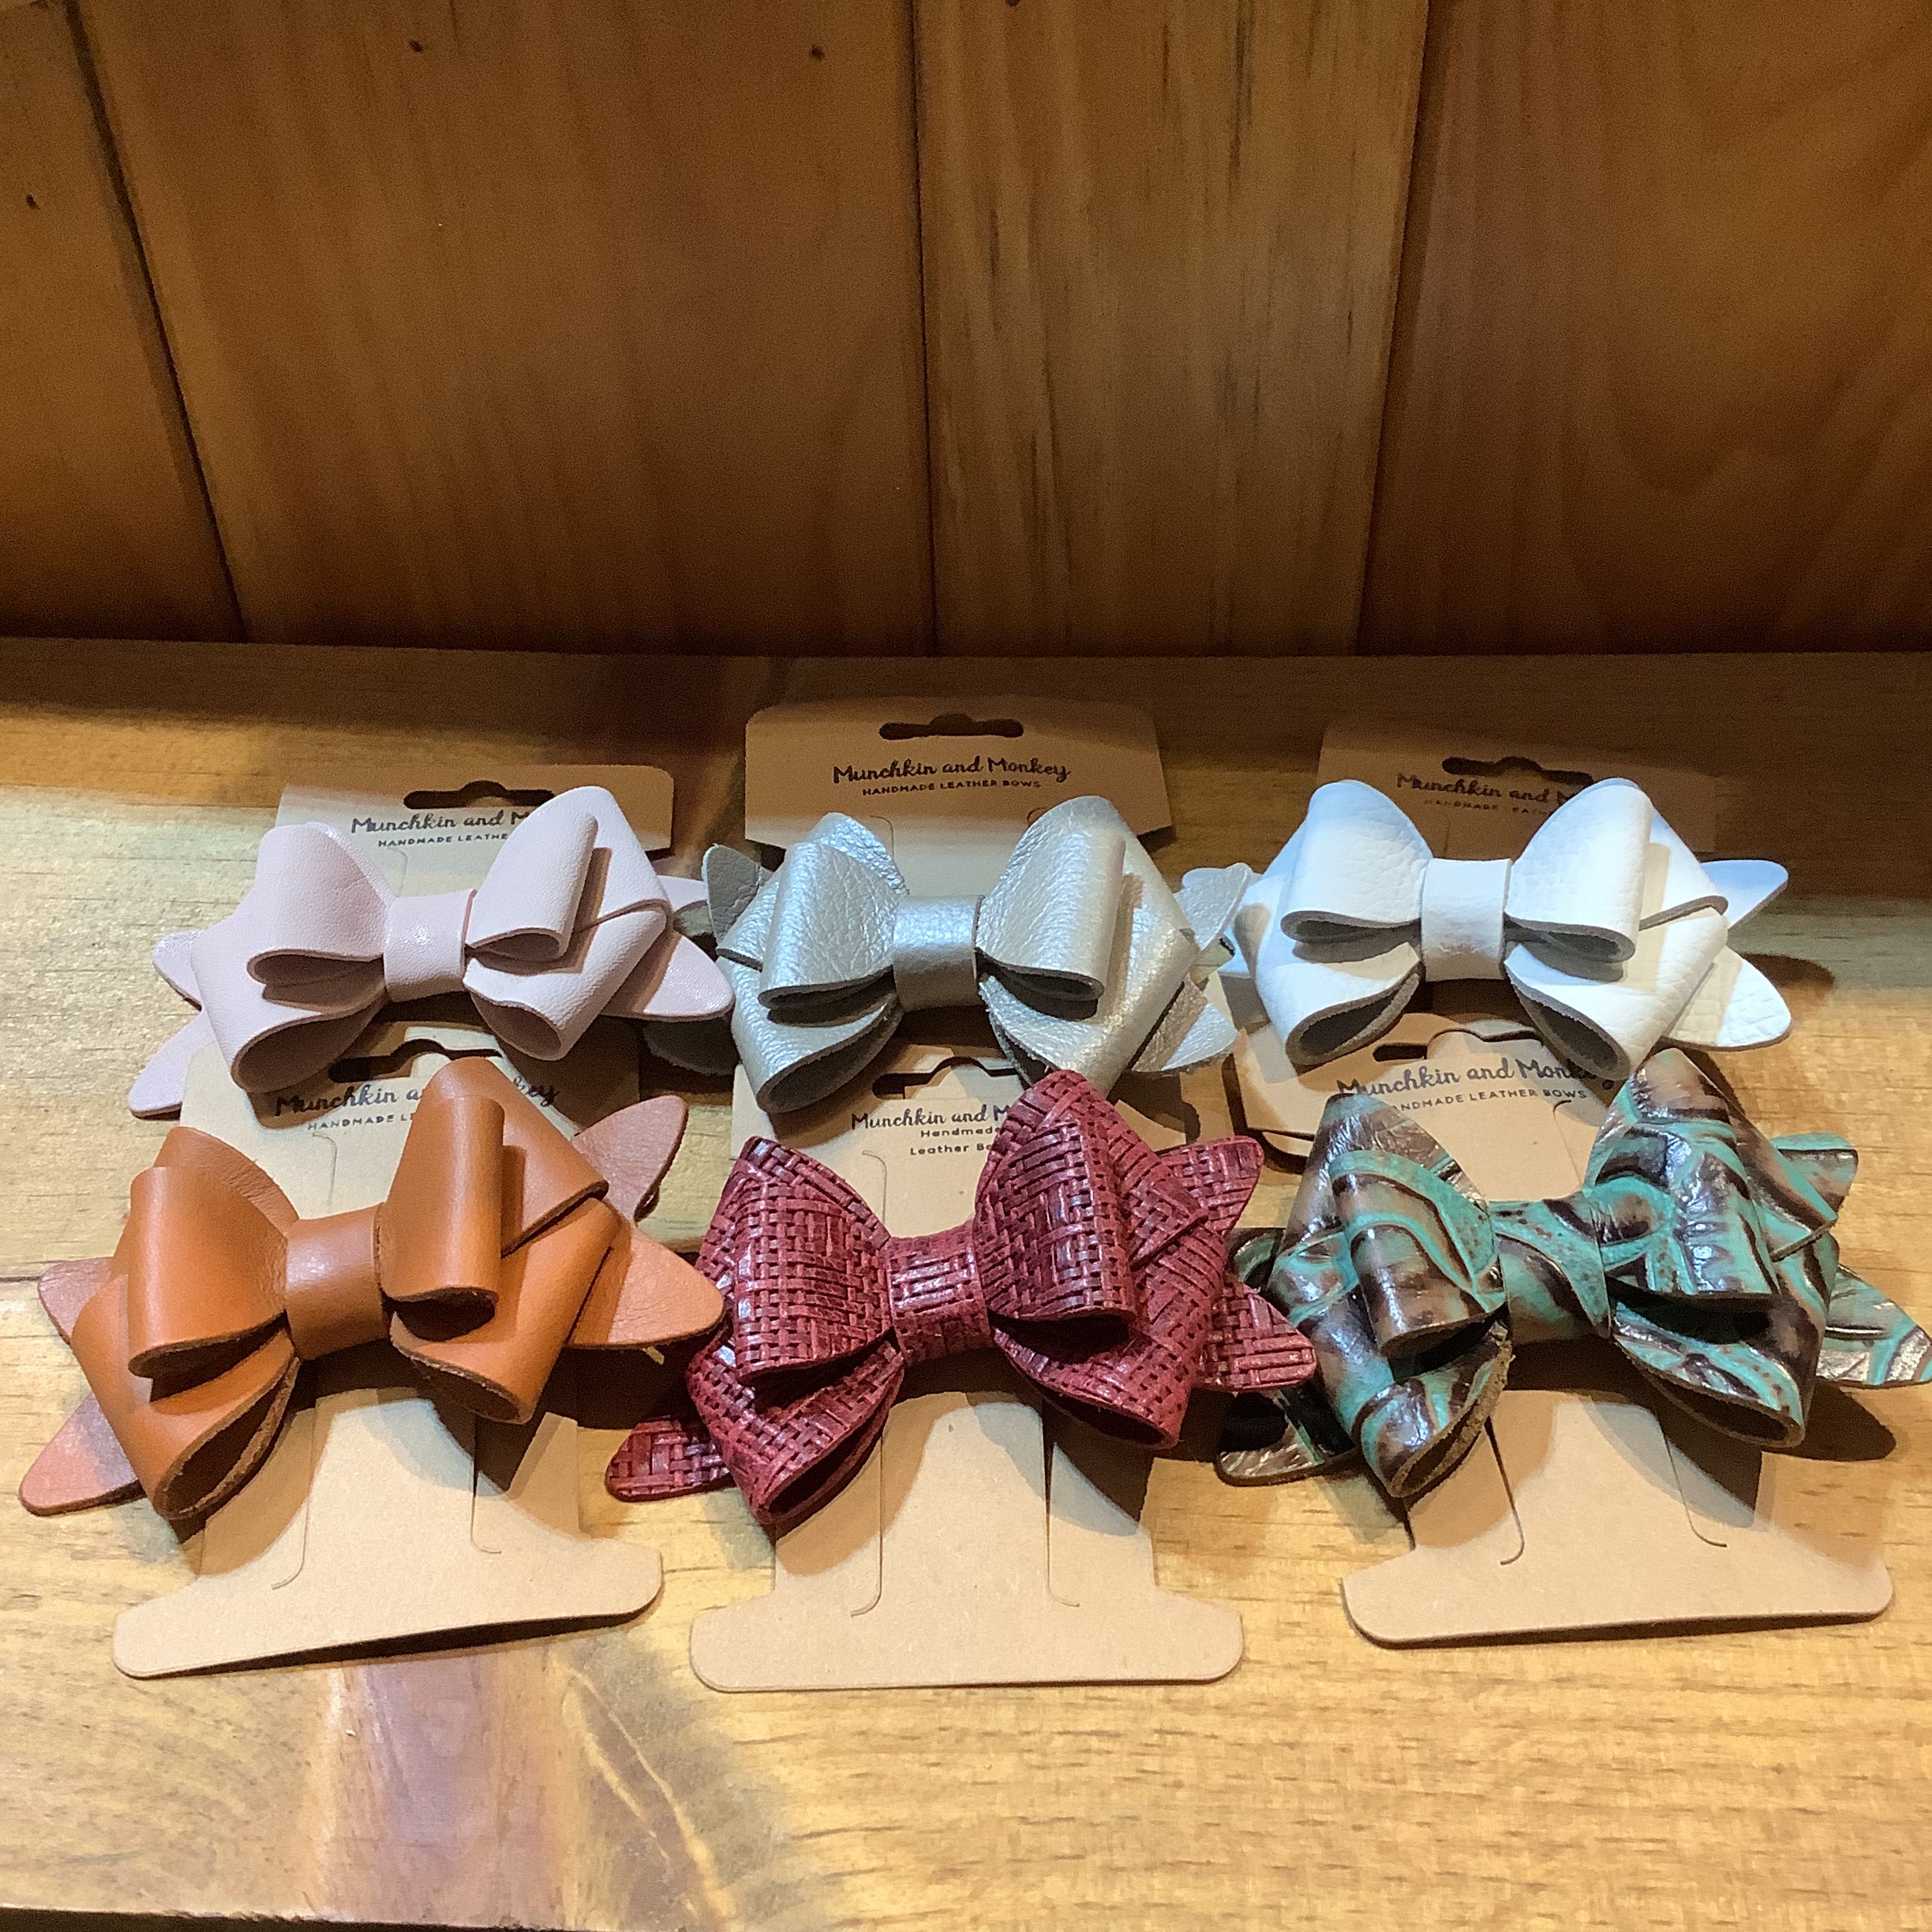 Munchkin and Monkey - Leather Bow Clips